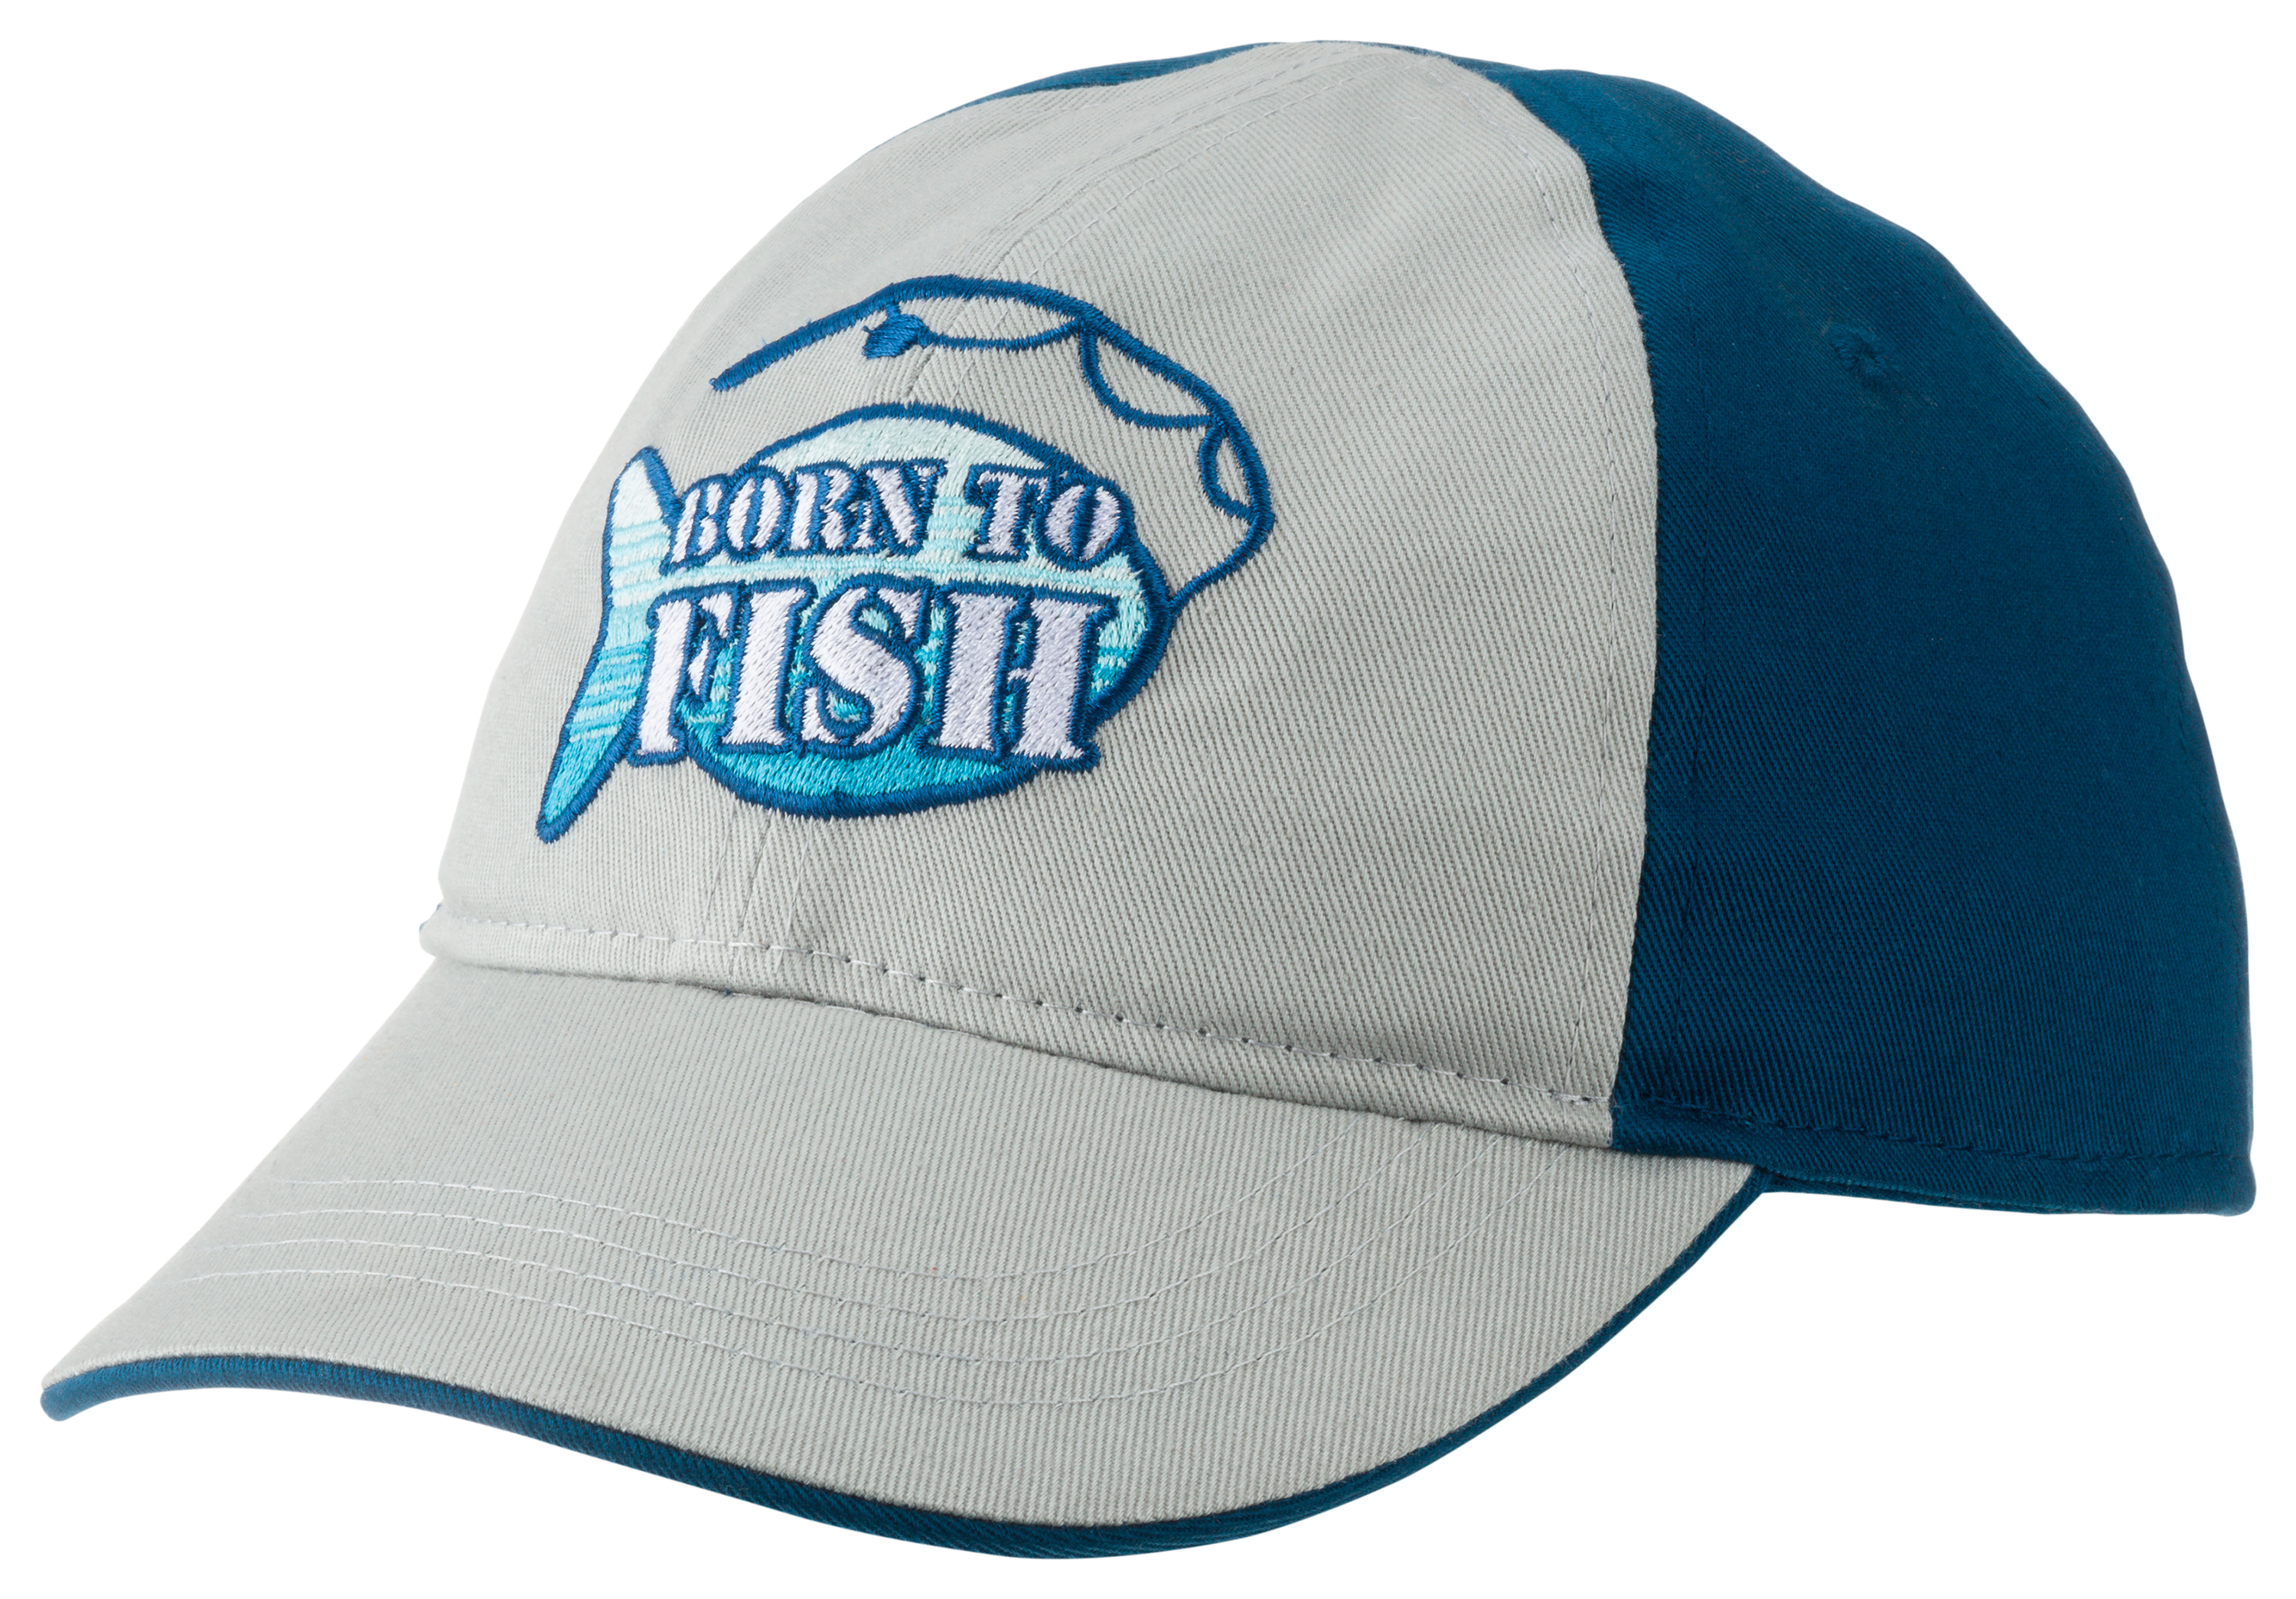 Bass Pro Shops Born to Fish Cap for Baby Boys